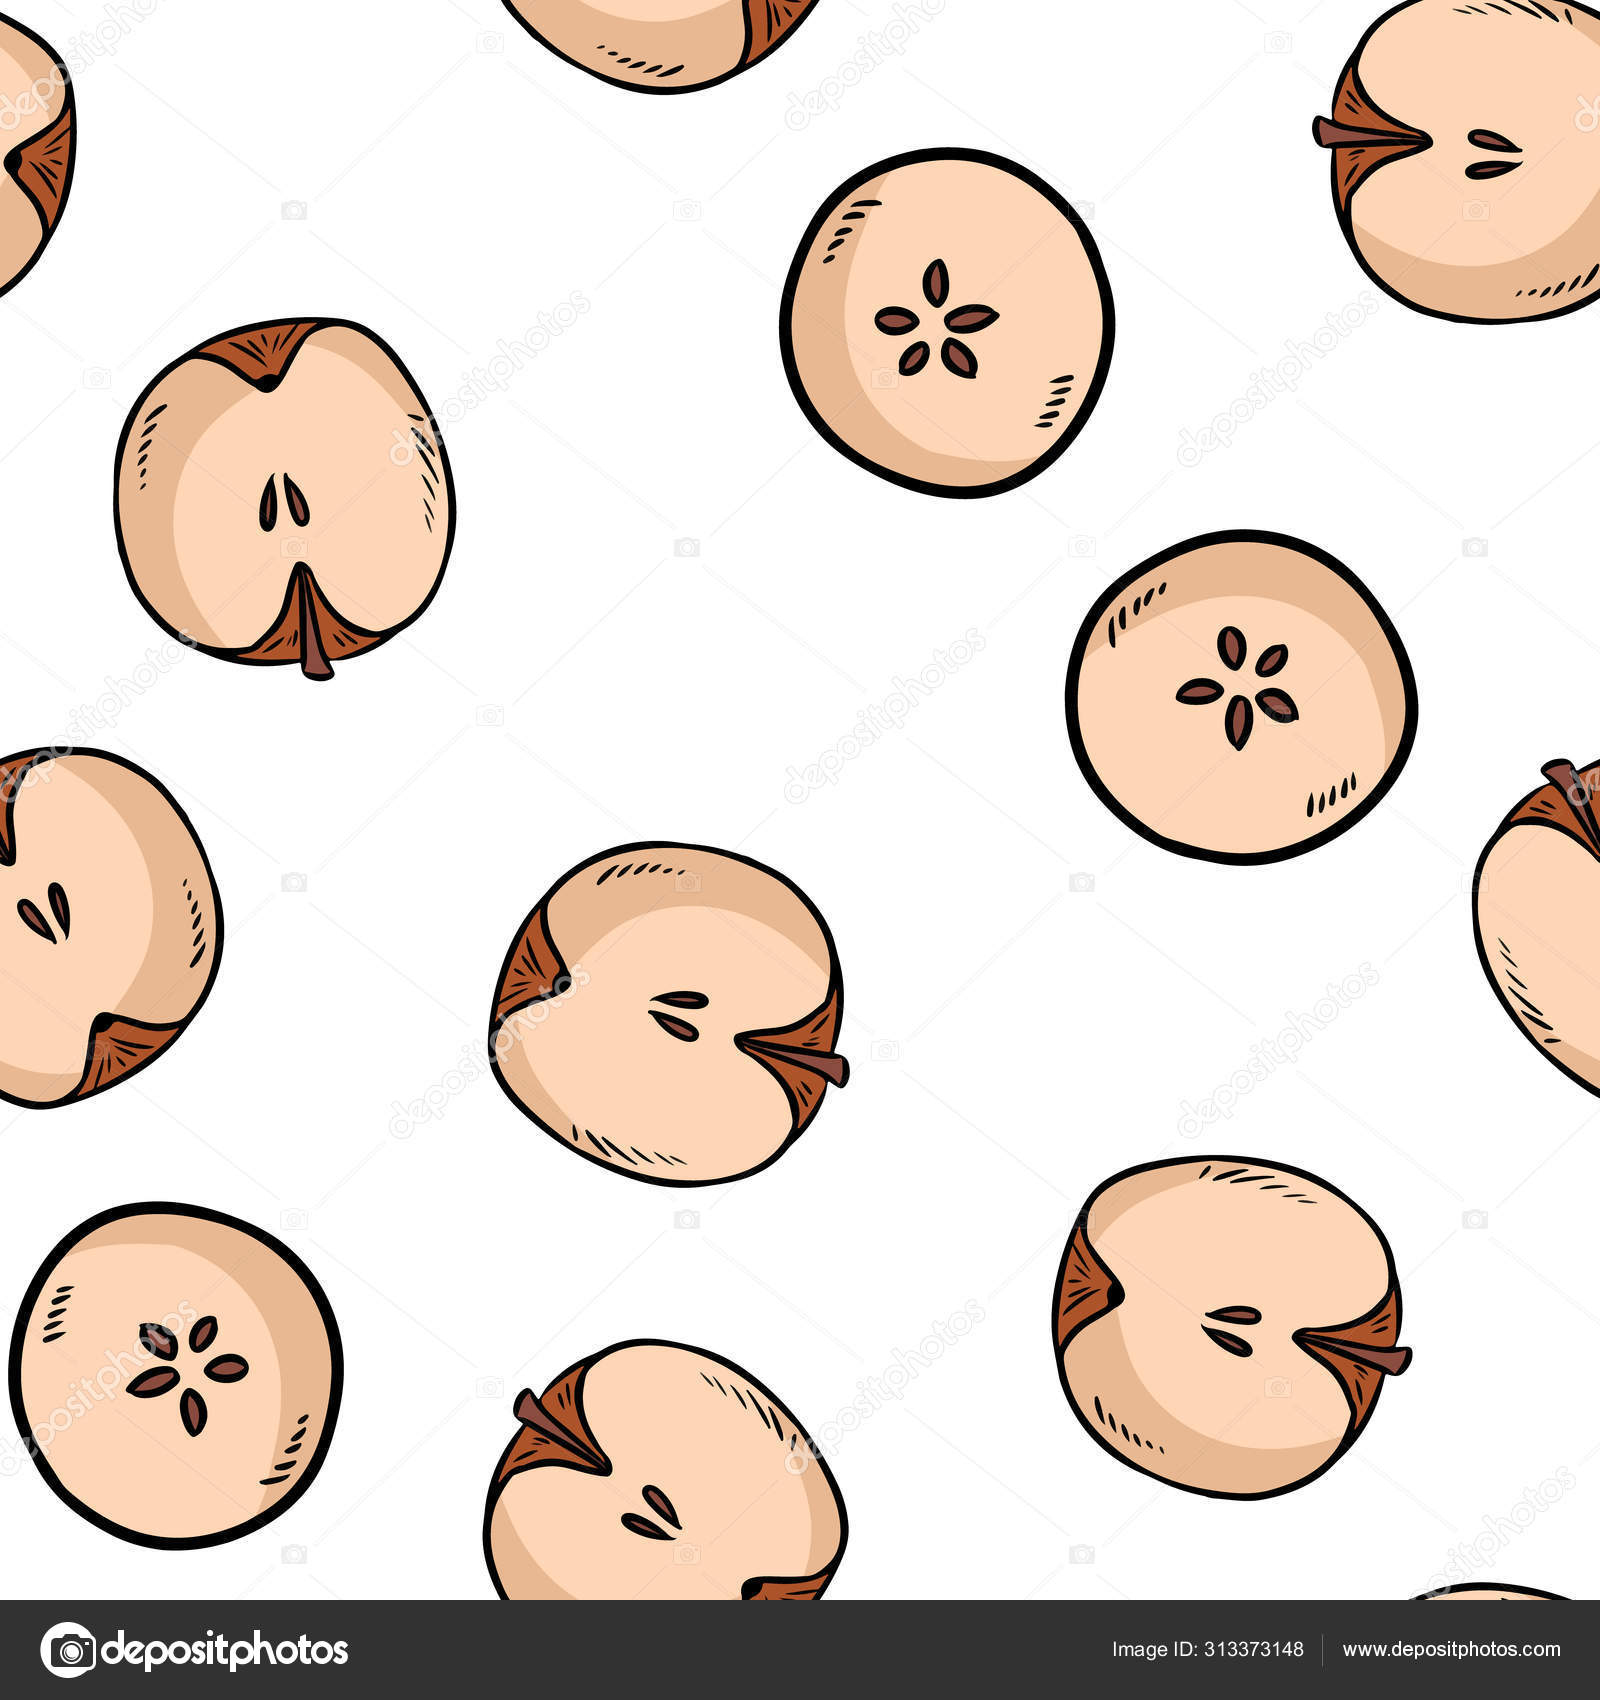 Cute Cut In Half Apples Natural Drawn Seamless Pattern Wallpaper Cartoon Style Decoration Background Texture Tile Vector Image By C Oixxo Yandex Ru Vector Stock